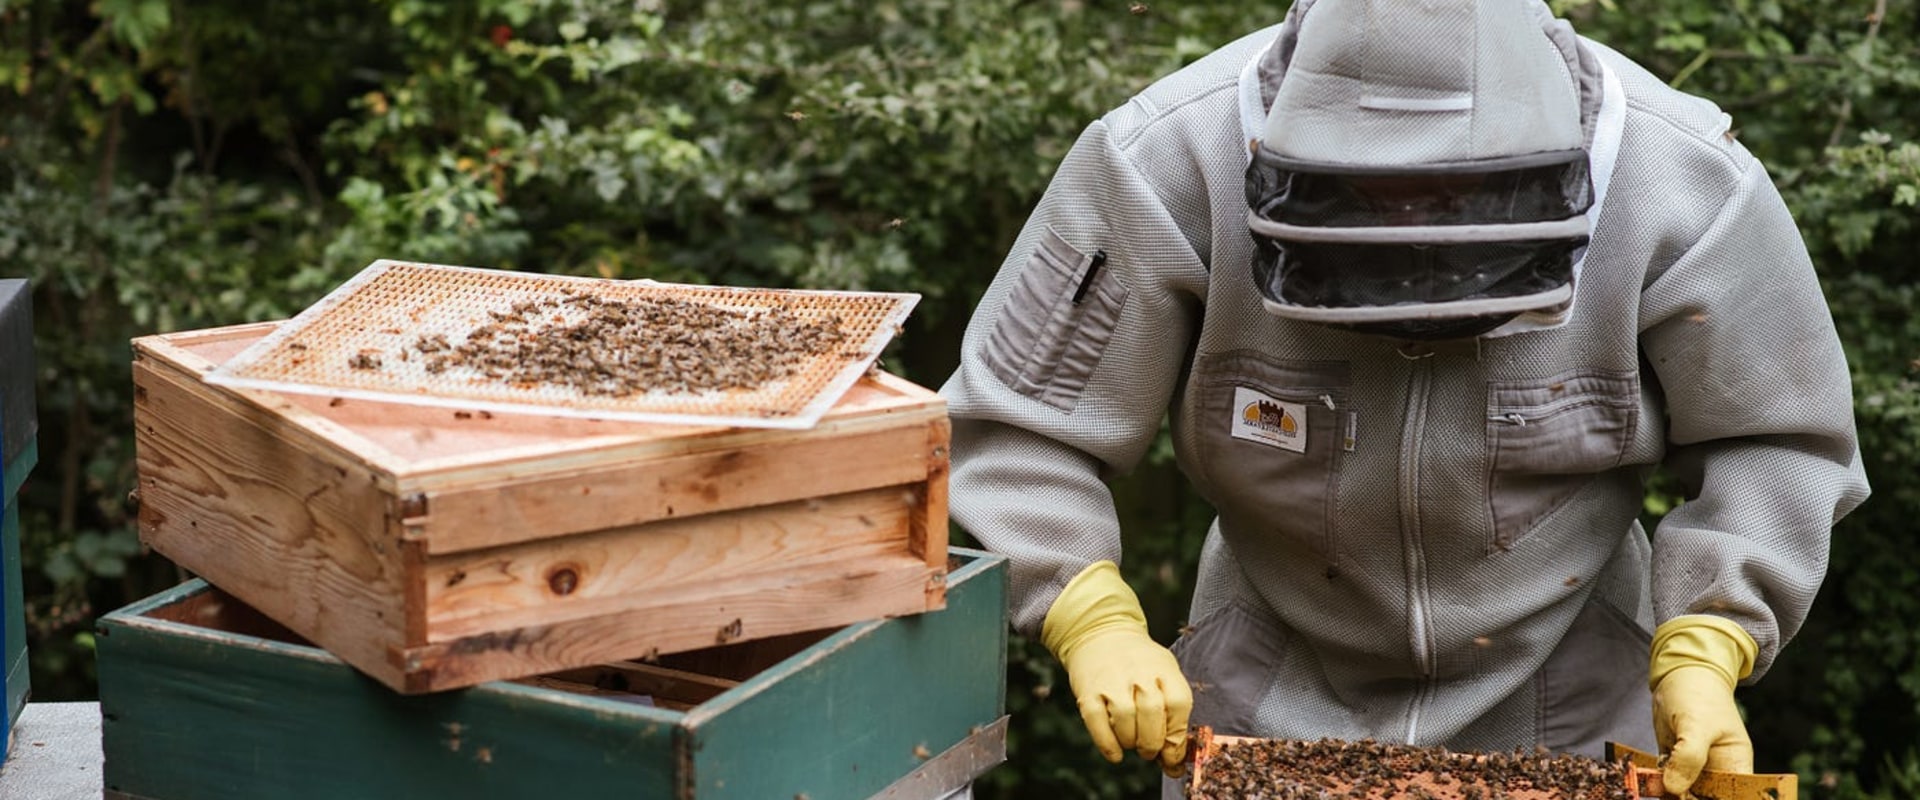 How to Select the Right Equipment for Beekeeping